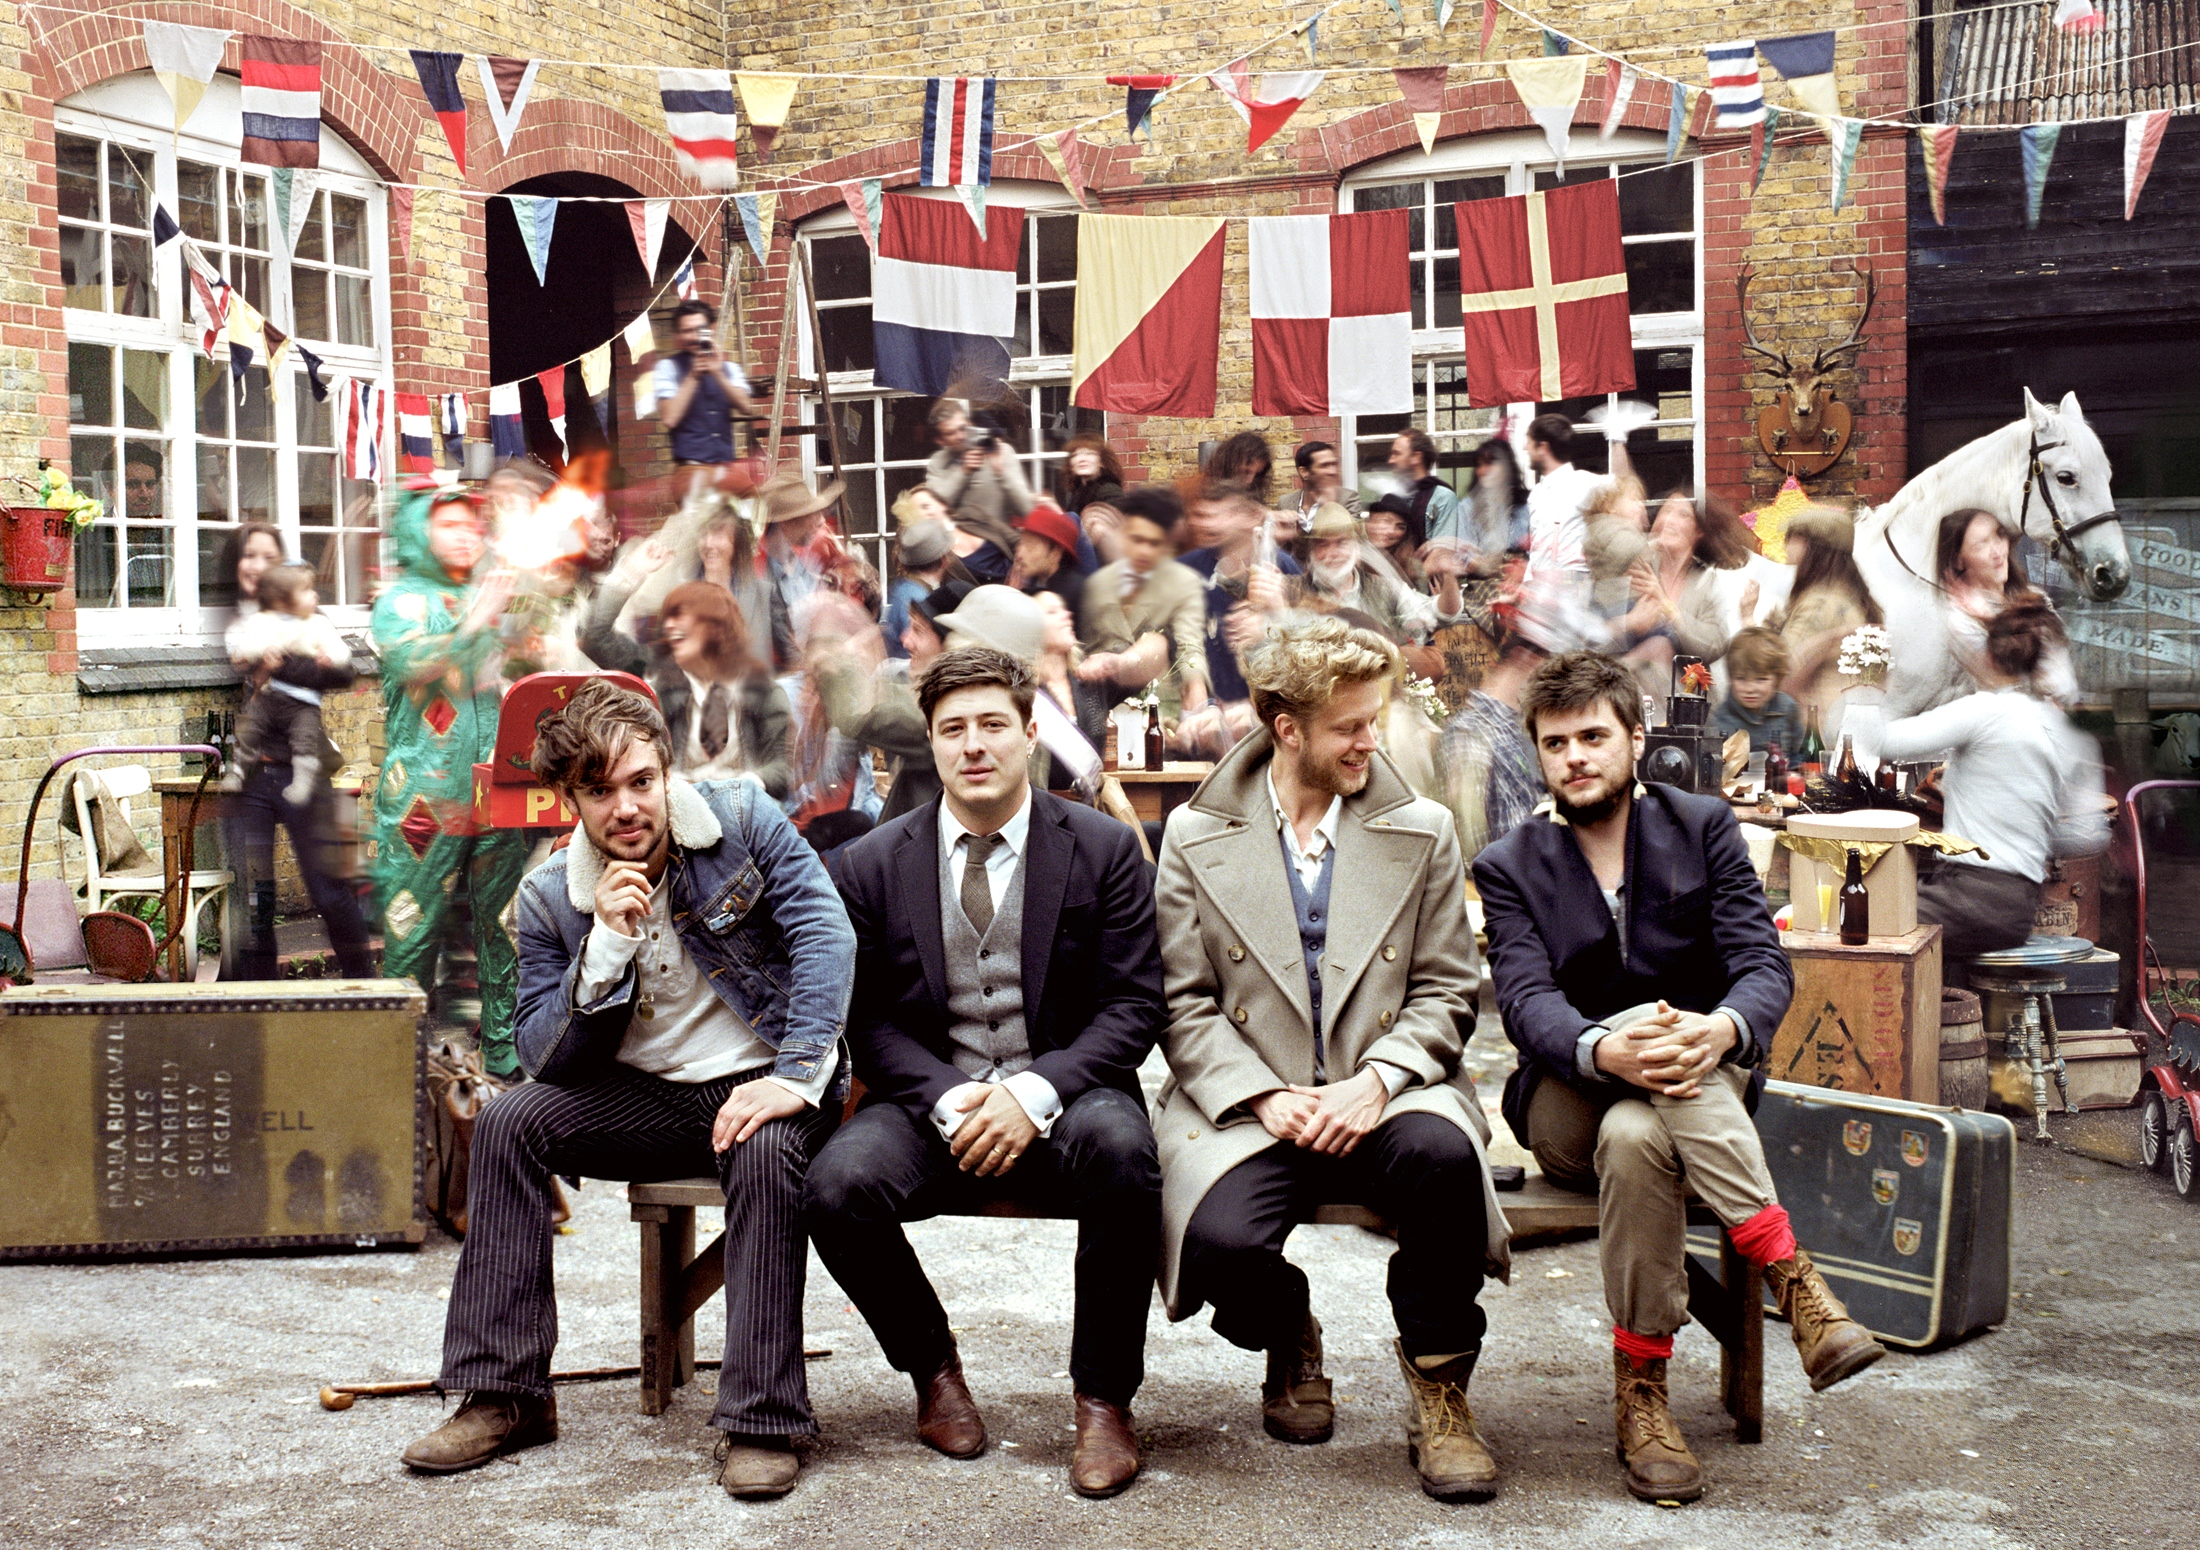 Mumford & Sons Wallpapers